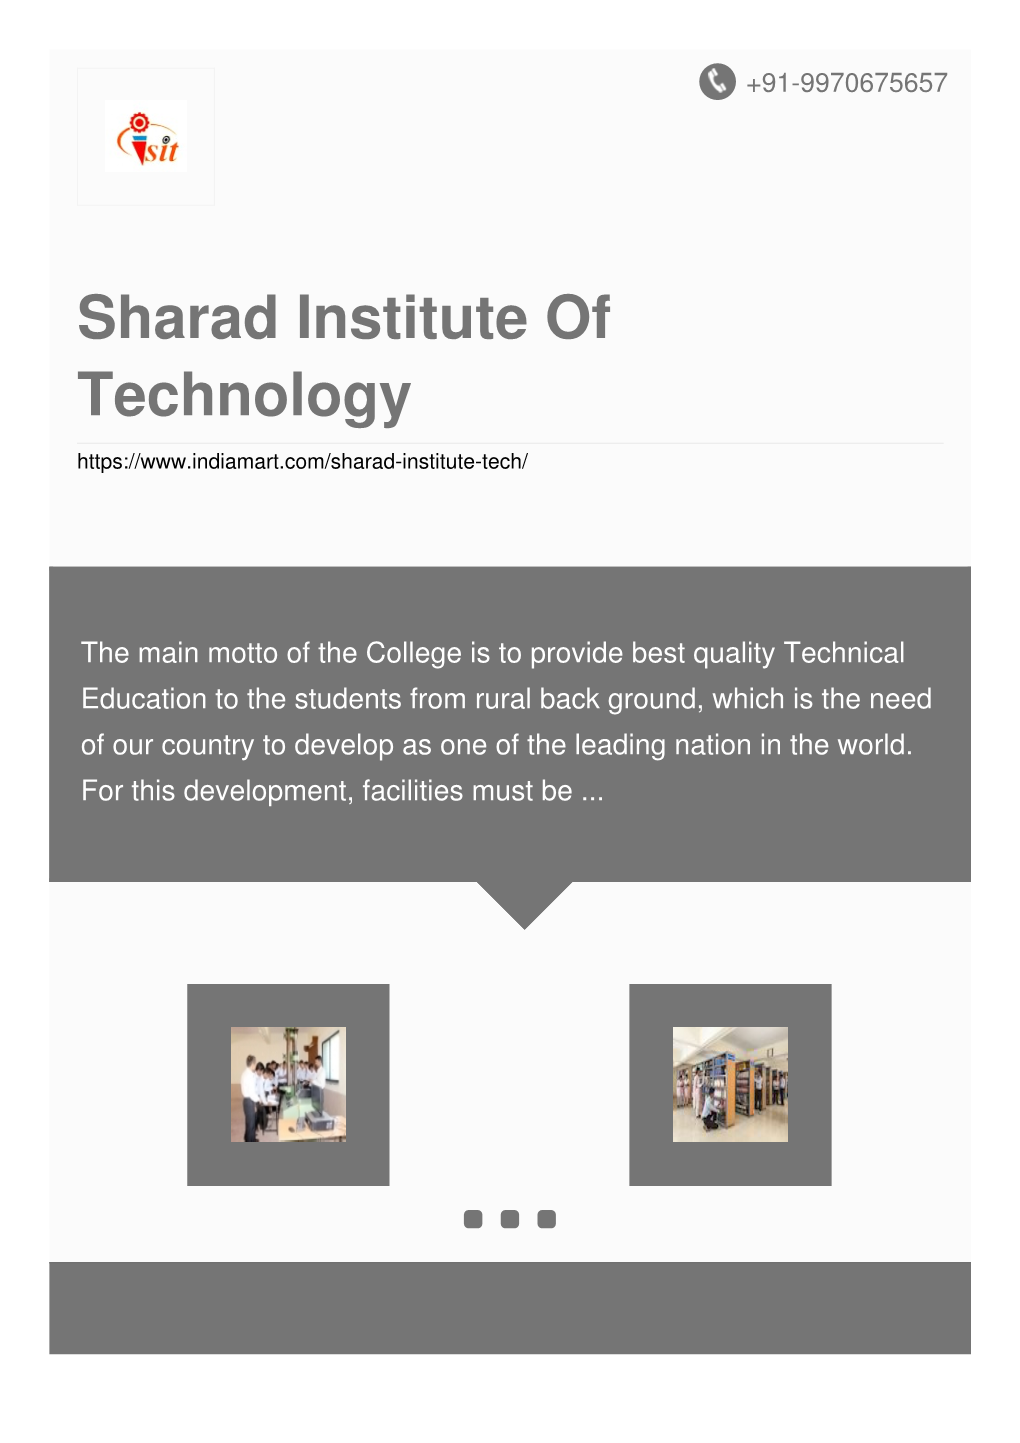 Sharad Institute of Technology